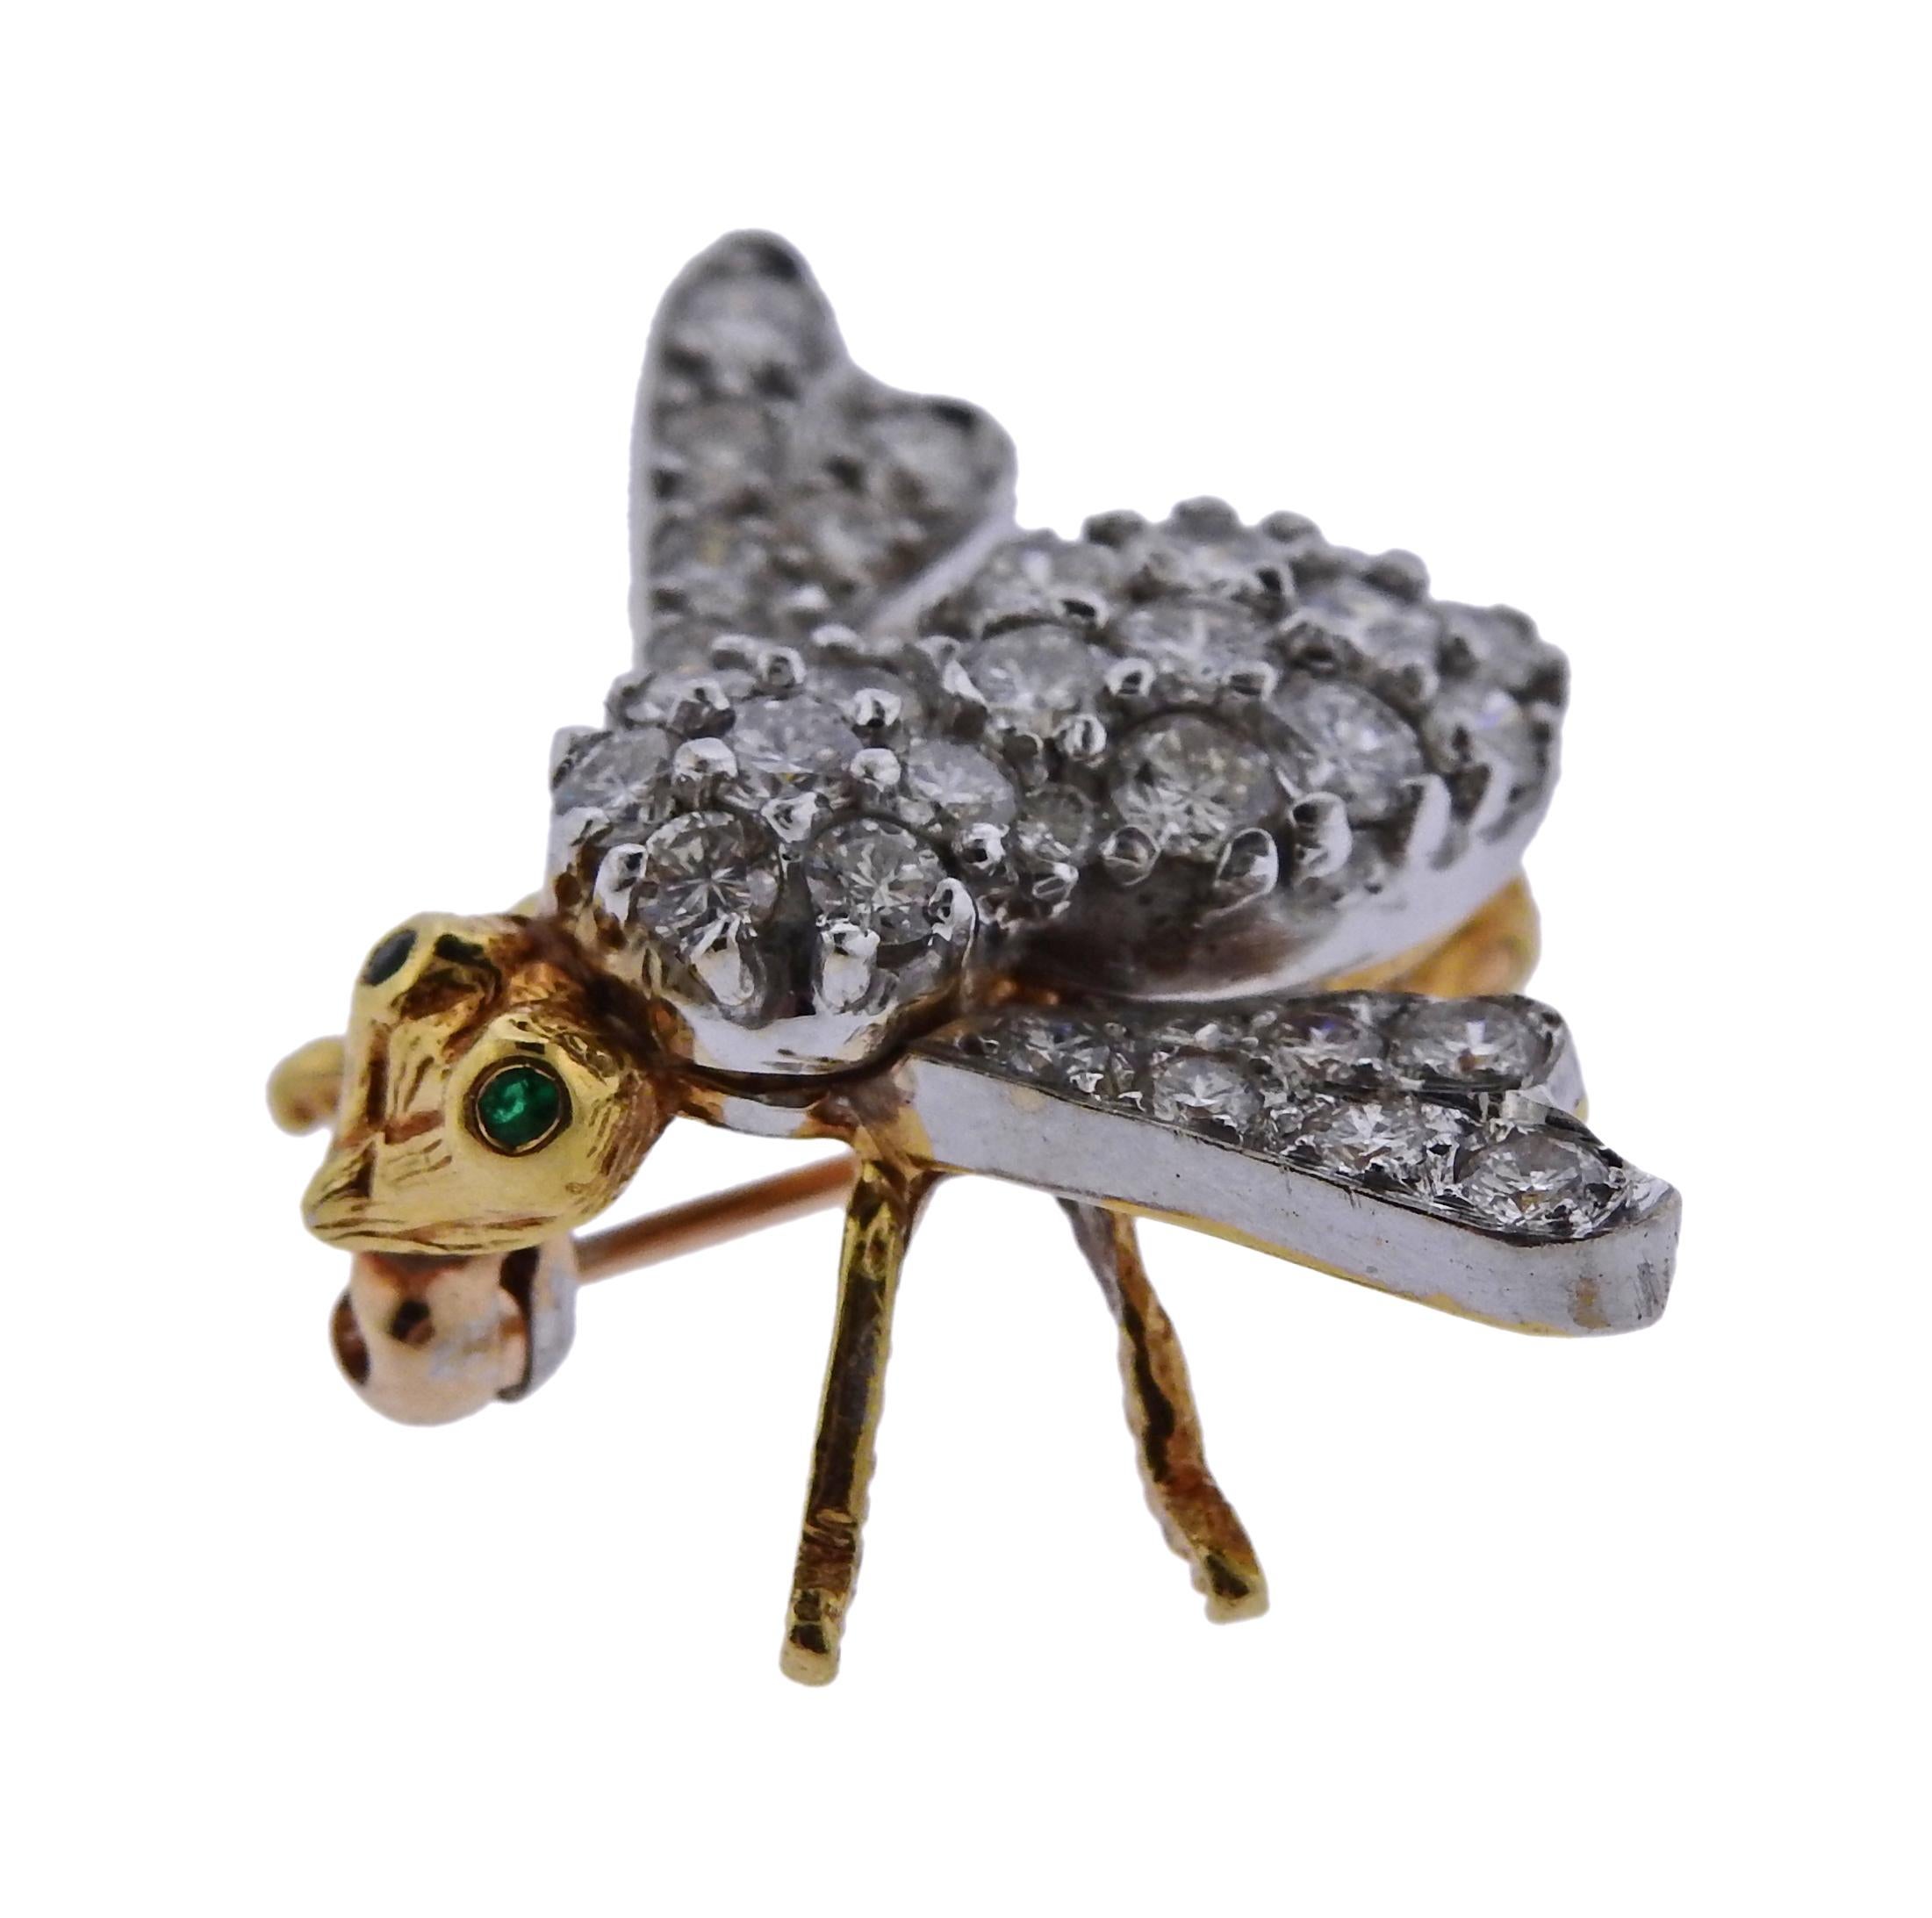 Iconic bee brooch, crafted by Herbert Rosenthal, set in 18k yellow gold, featuring all diamond body with emerald eyes. Diamond weight is approx. 1.12ctw G/VS.  Bee is 20mm x 25mm  and marked 18k HR hallmark. 